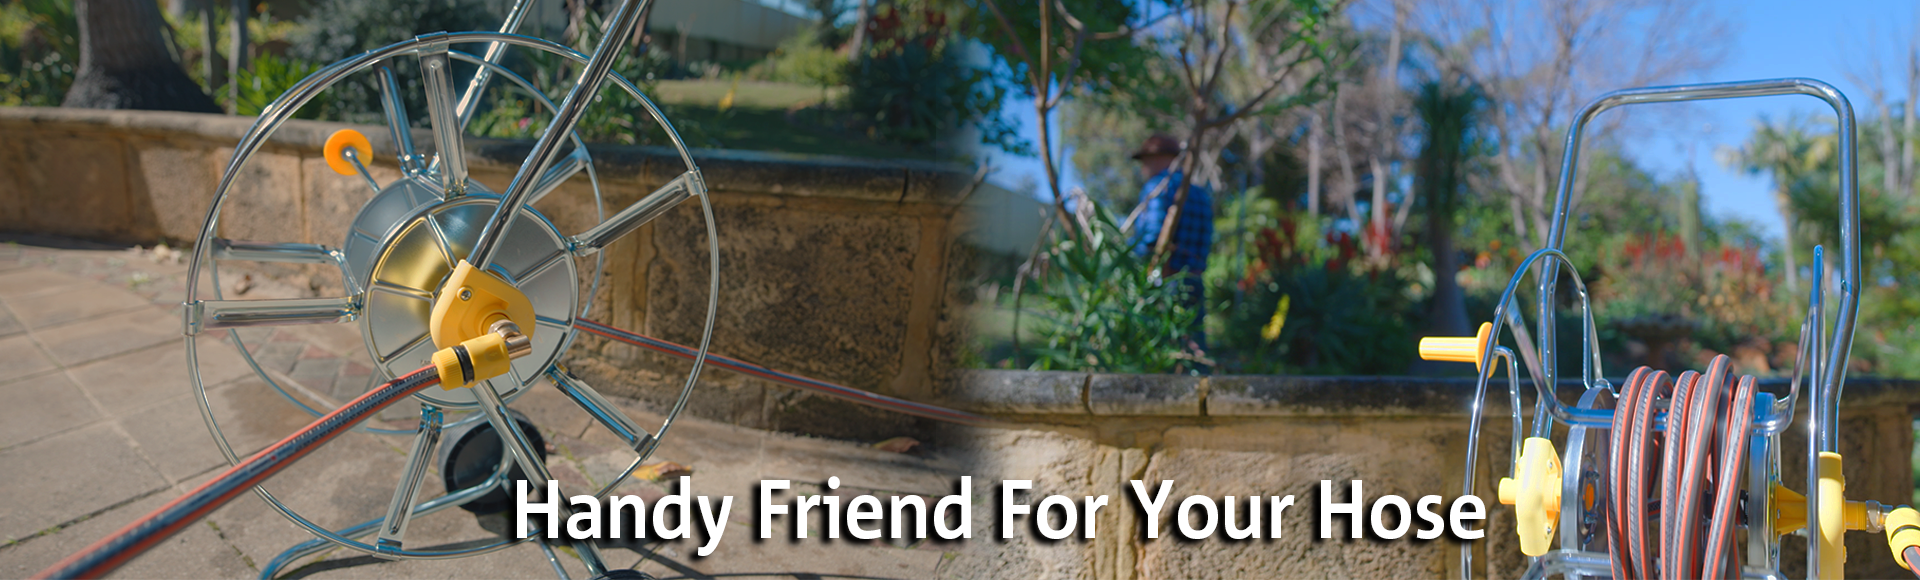 Handy Friend For Your Hose